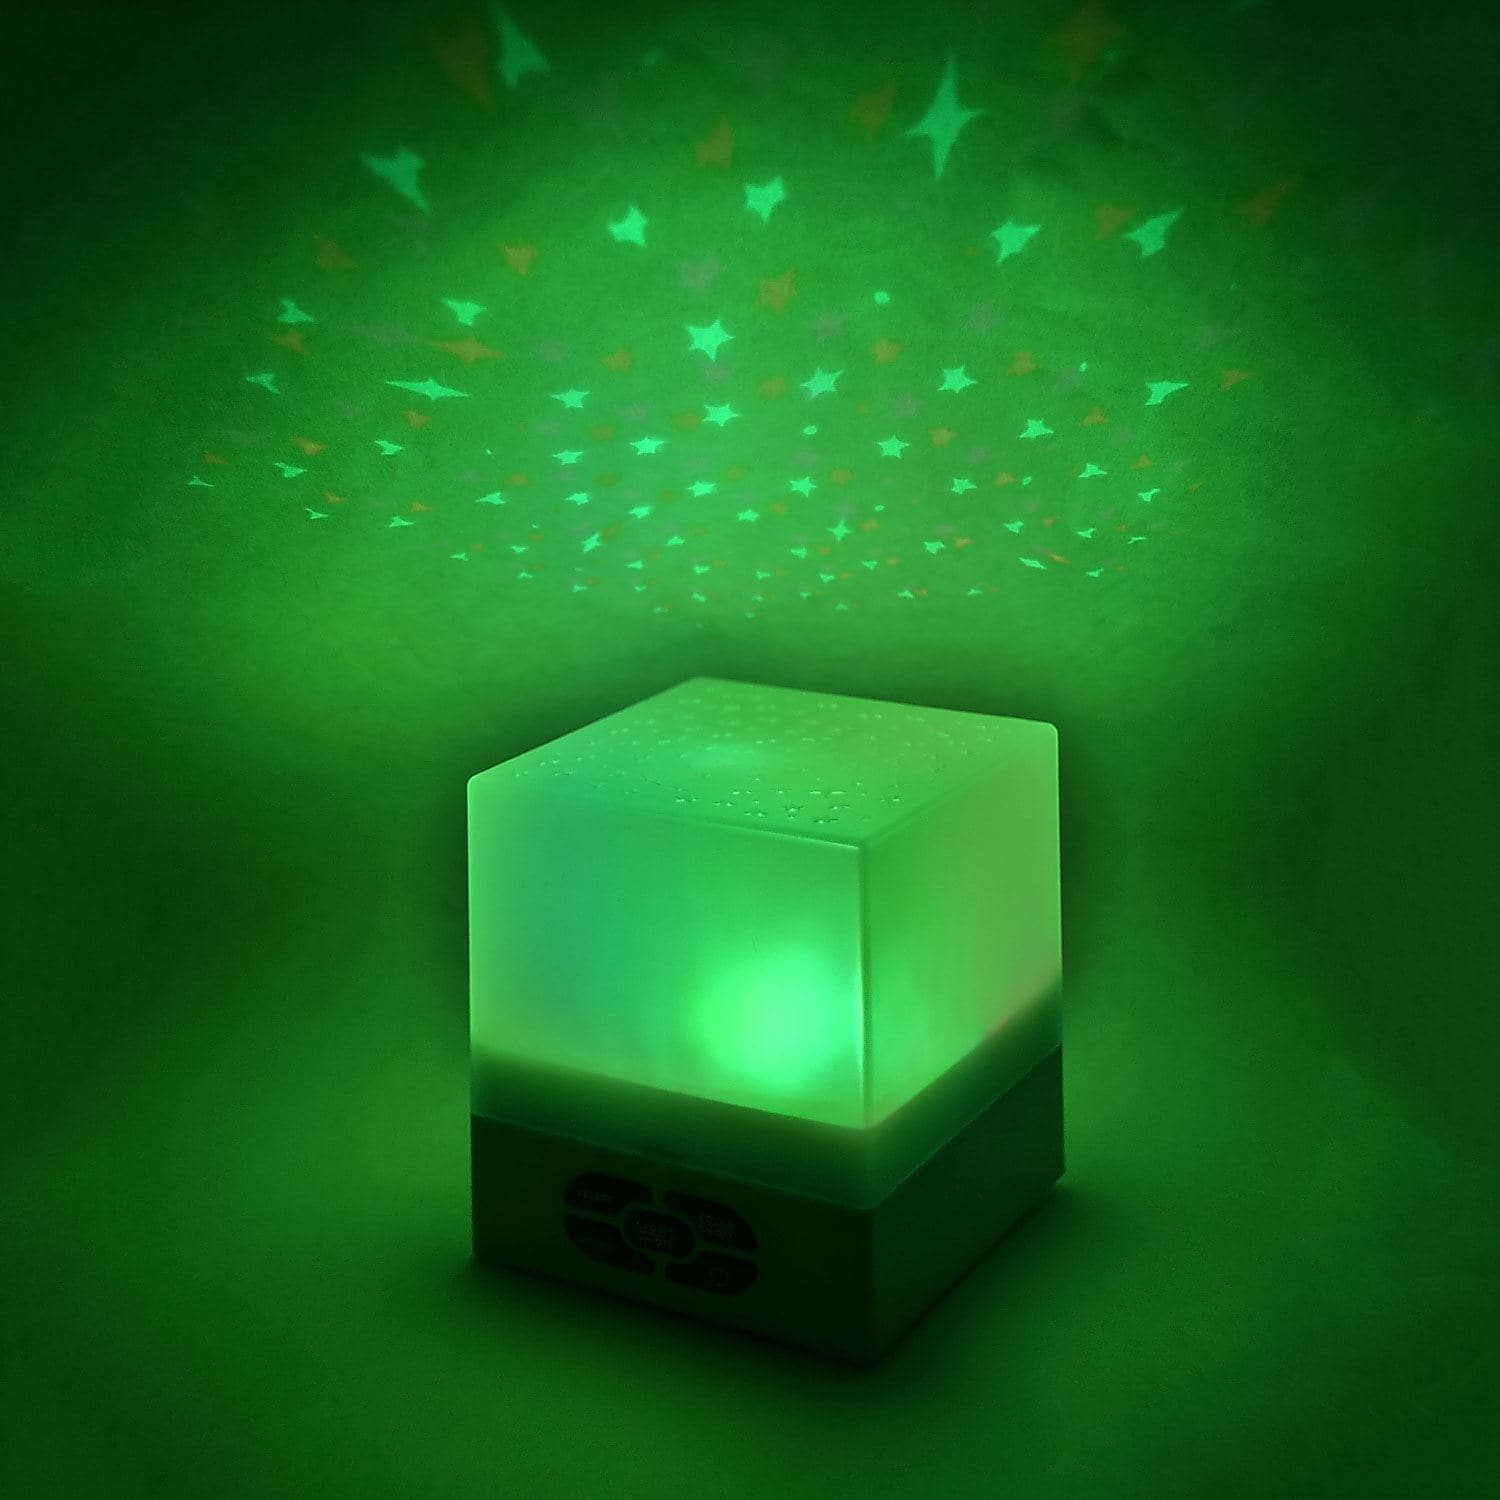 Projector Cube Lullaby And Nature Sounds, The Star Projector Cube with Soothing Sounds helps to soothe restlessness to allow you to get to sleep. The Star Projector Cube with Soothing Sounds has a ever-changing light show projects a nighttime sky scene on to the ceiling. This helps to relieve stress and the lullaby and nature sounds offer relief from the effects of tinnitus and insomnia. Features of the Star Projector Cube with Soothing Sounds The Star Projector Cube with Soothing Sounds is operated using p